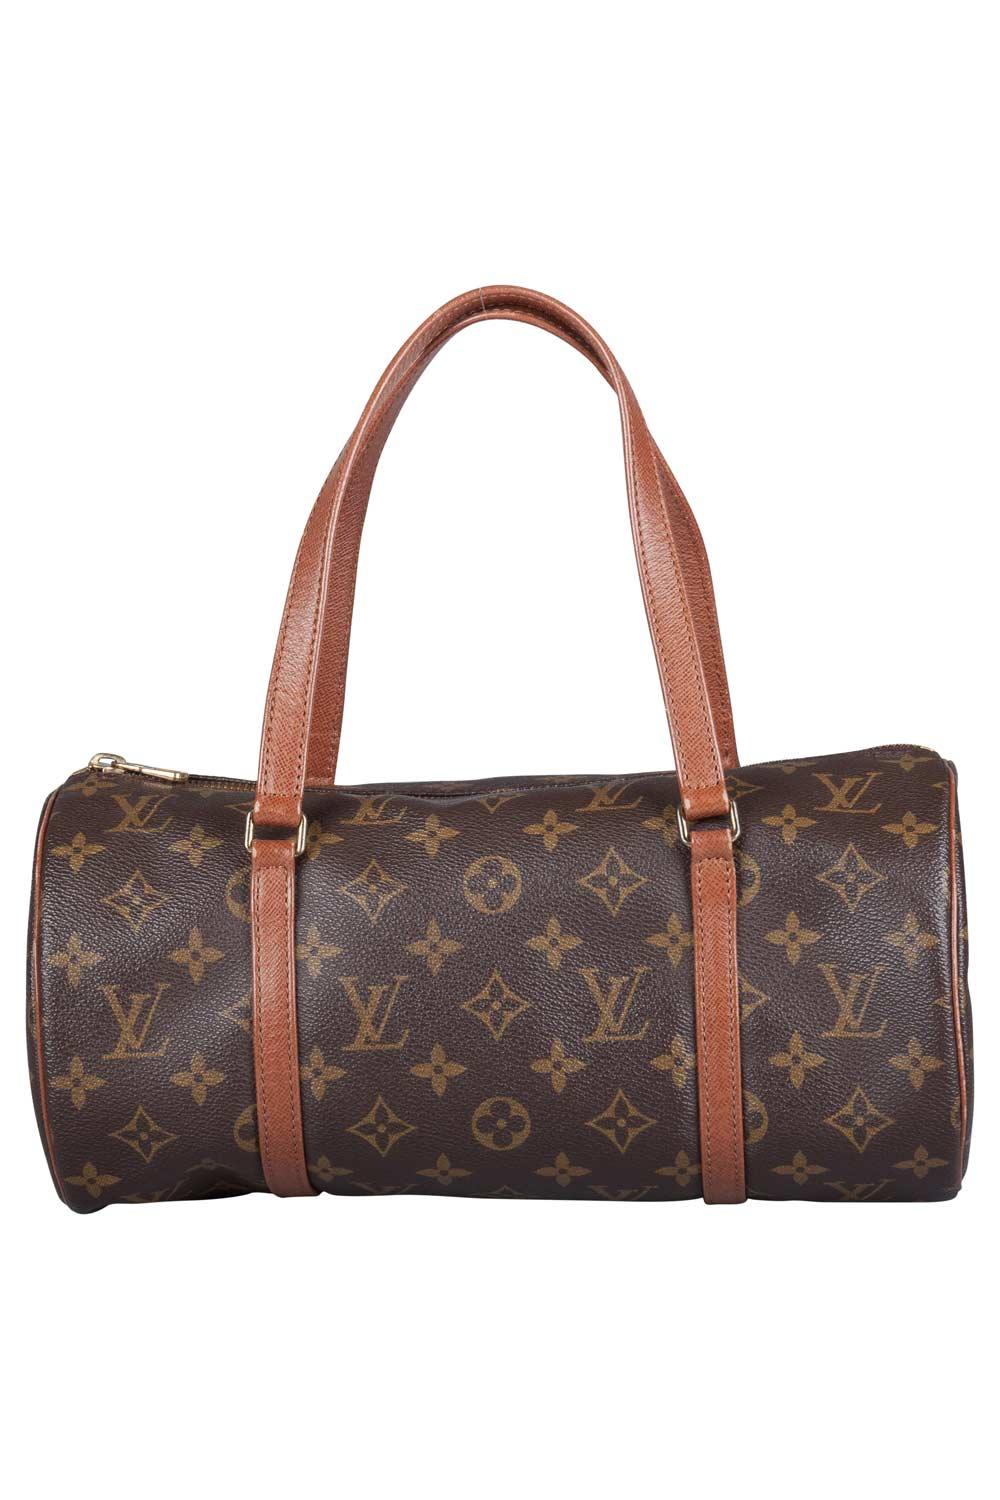 Another classic from the house of Louis Vuitton is this beautiful Papillon. The bag is made from monogram canvas, lending it the signature touch. The top zip closure opens to a roomy leather-lined interior that will safely keep your belongings and